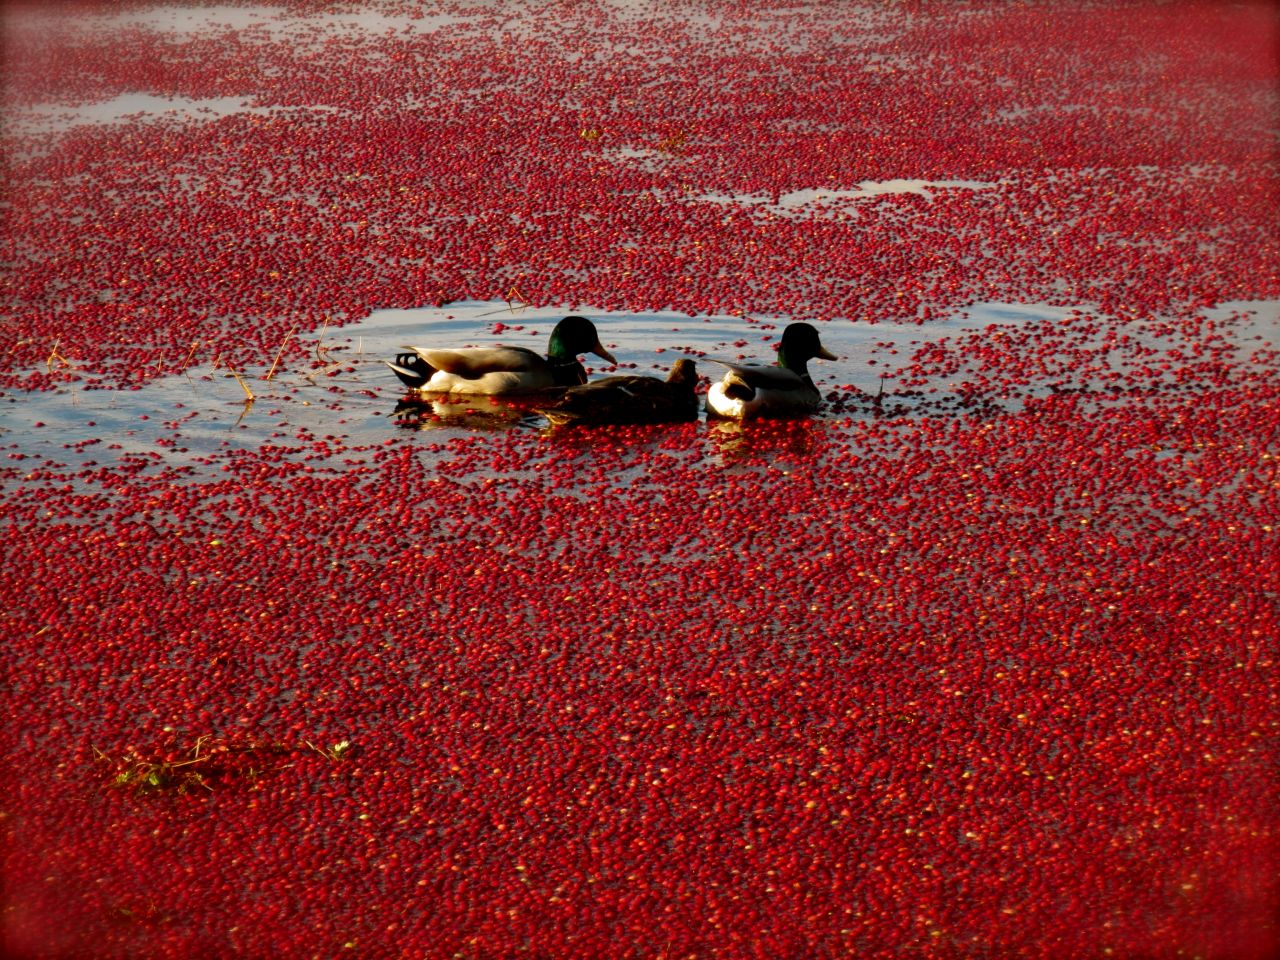 Happy Thanksgiving! These ducks sure look like they're enjoying a <a href="http://ireport.cnn.com/docs/DOC-1179461">cranberry bog</a> in Yarmouth, Massachusetts.